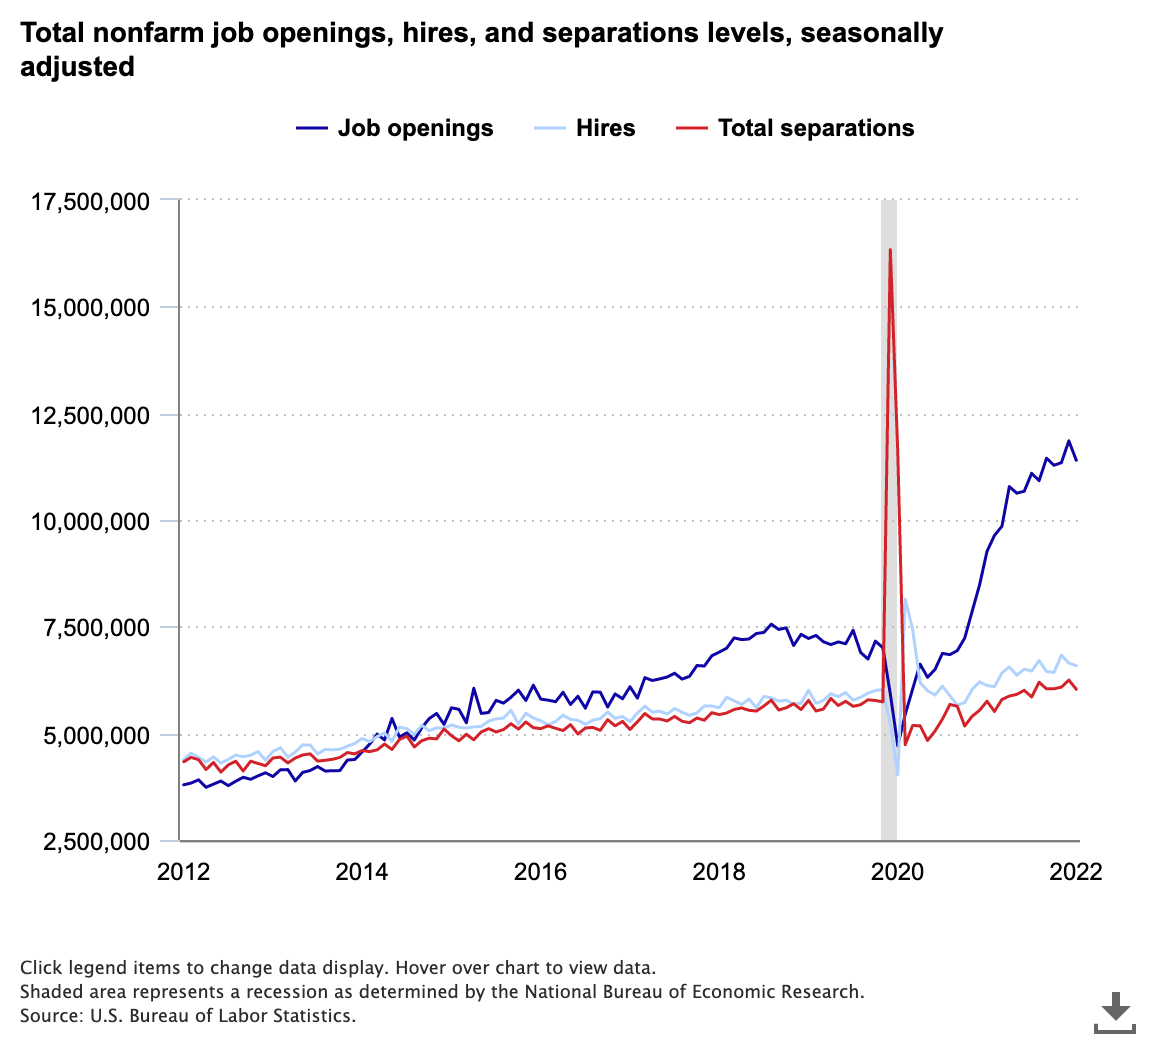 Total nonfarm job openings, hires, and separation levels, seasonally adjusted 